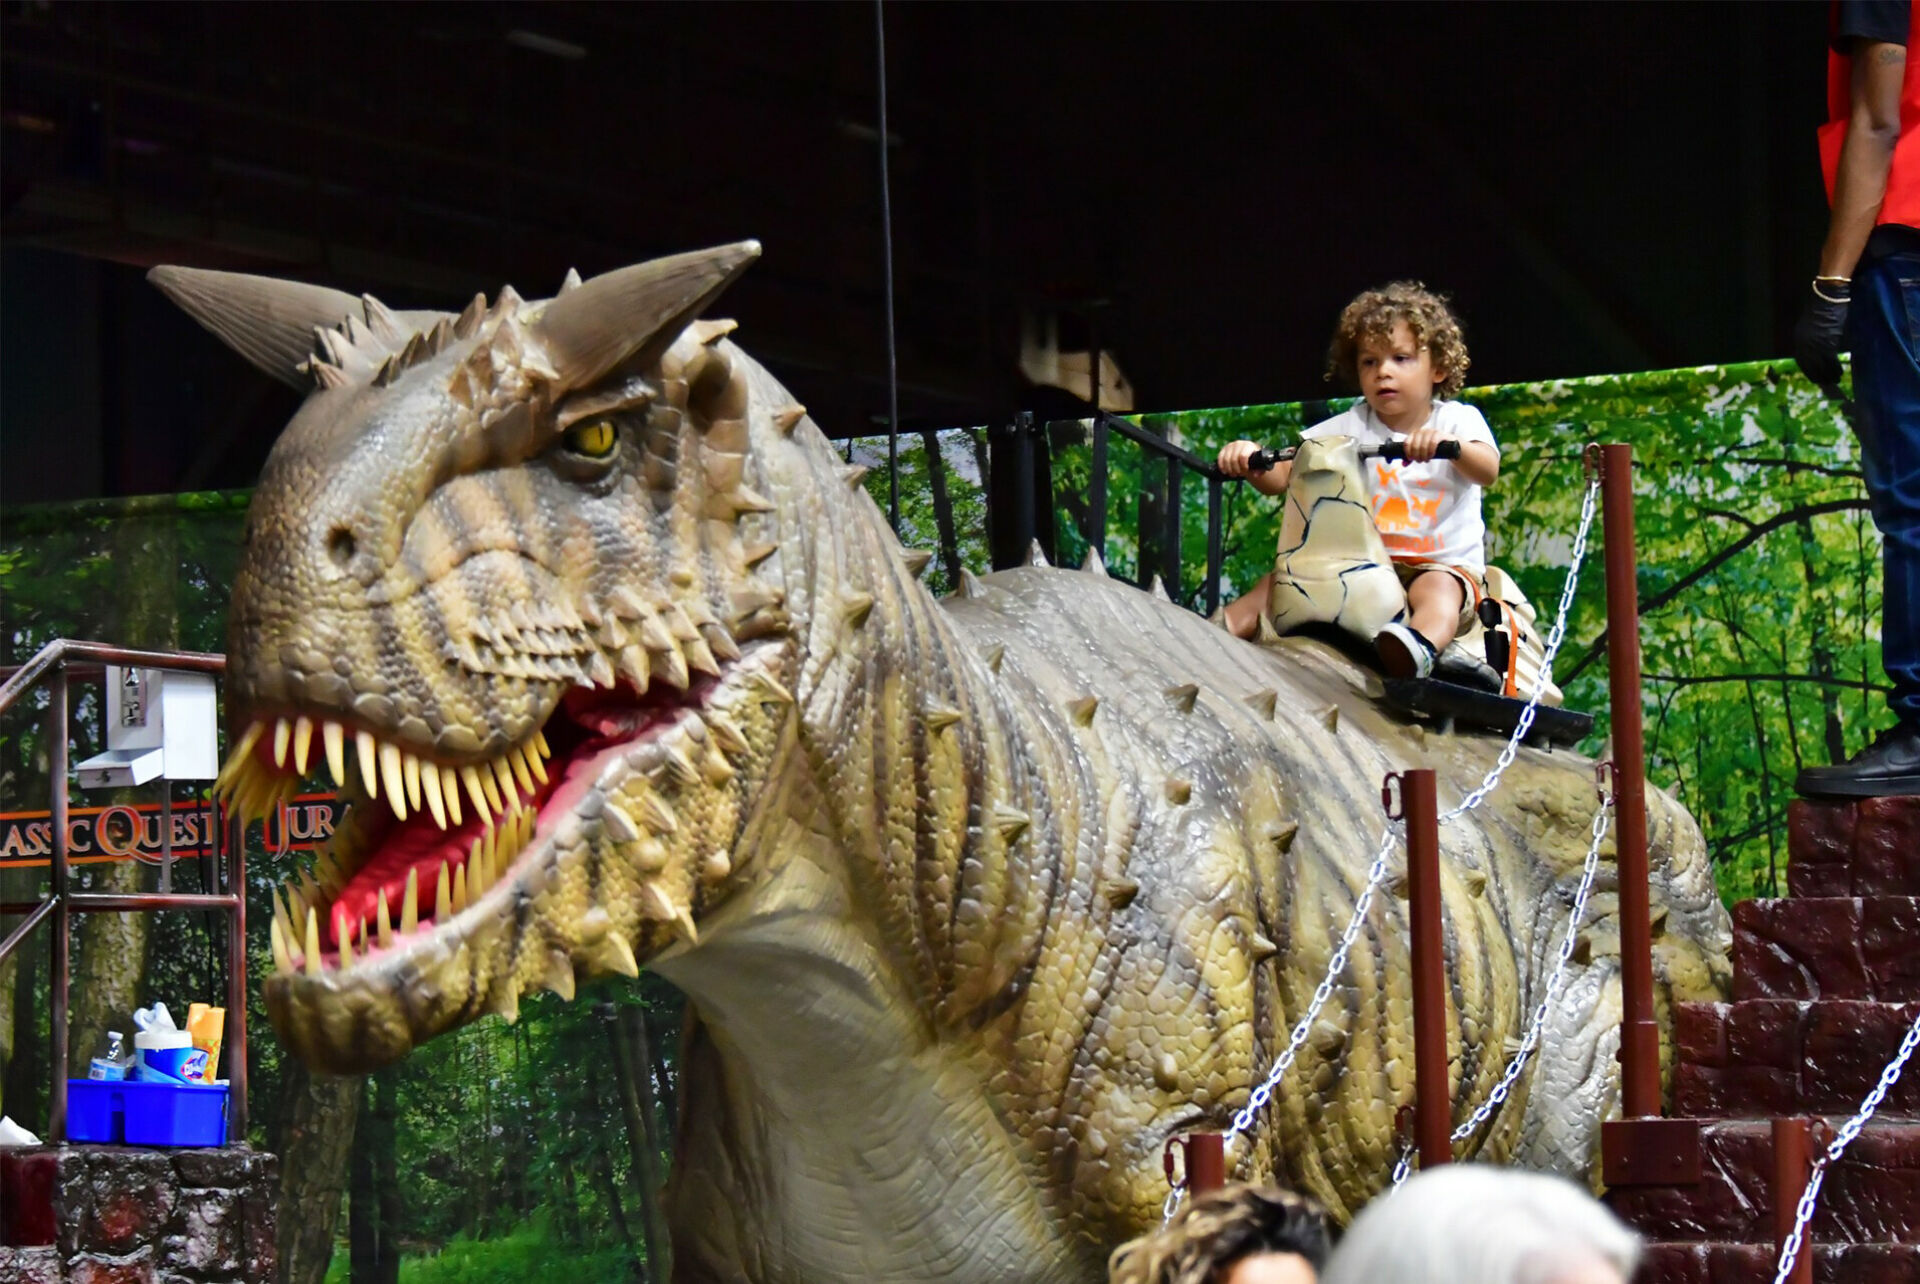 SAUR' INTO THE PAST: Jurassic Quest Exhibit Coming to E.C